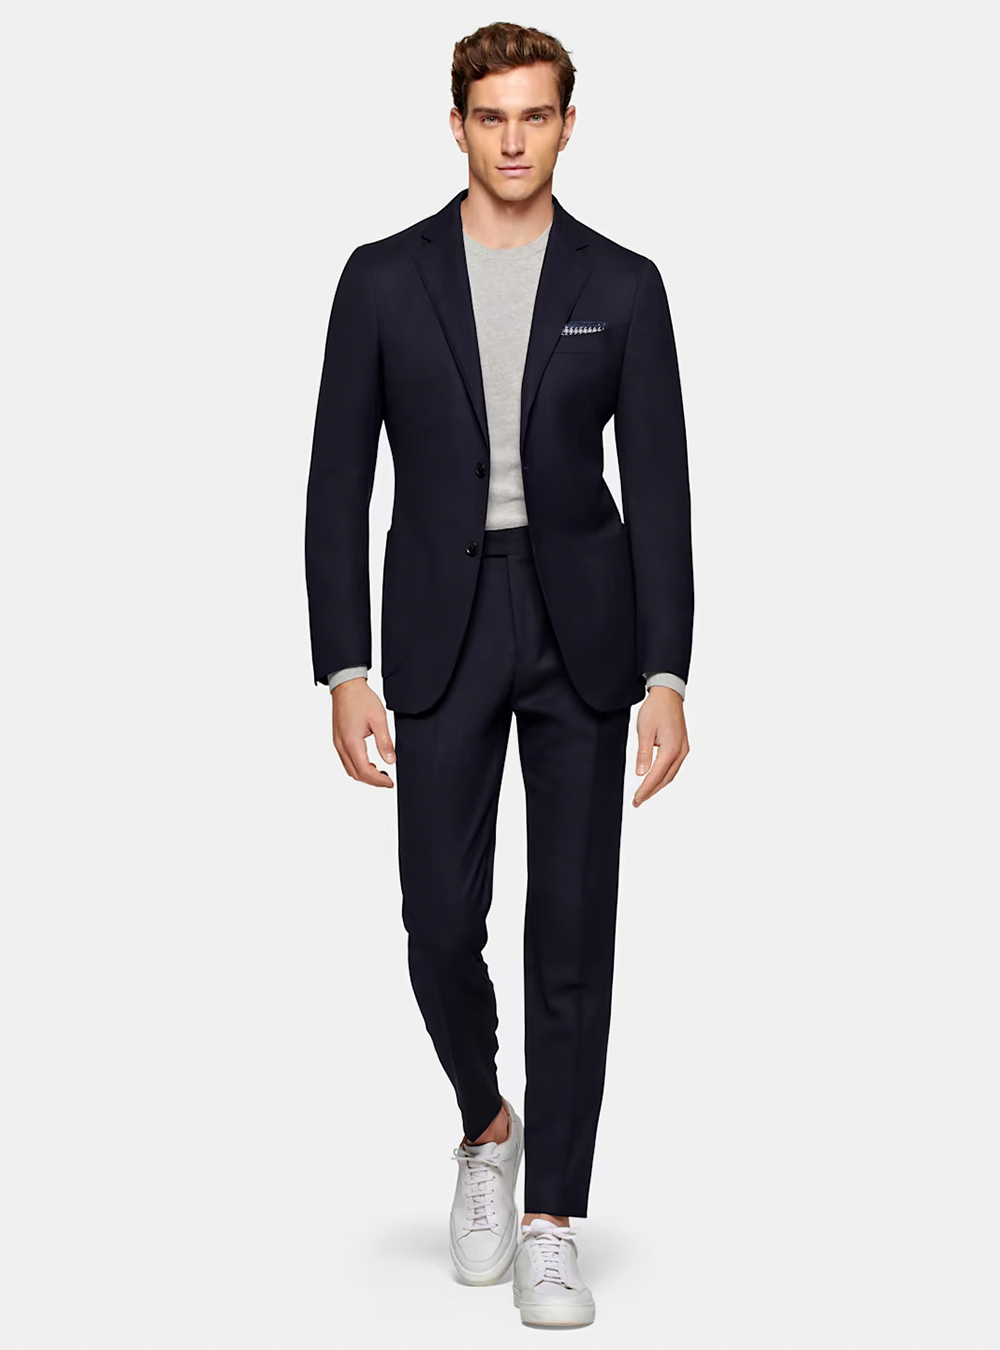 navy suit, grey t-shirt, and white sneakers